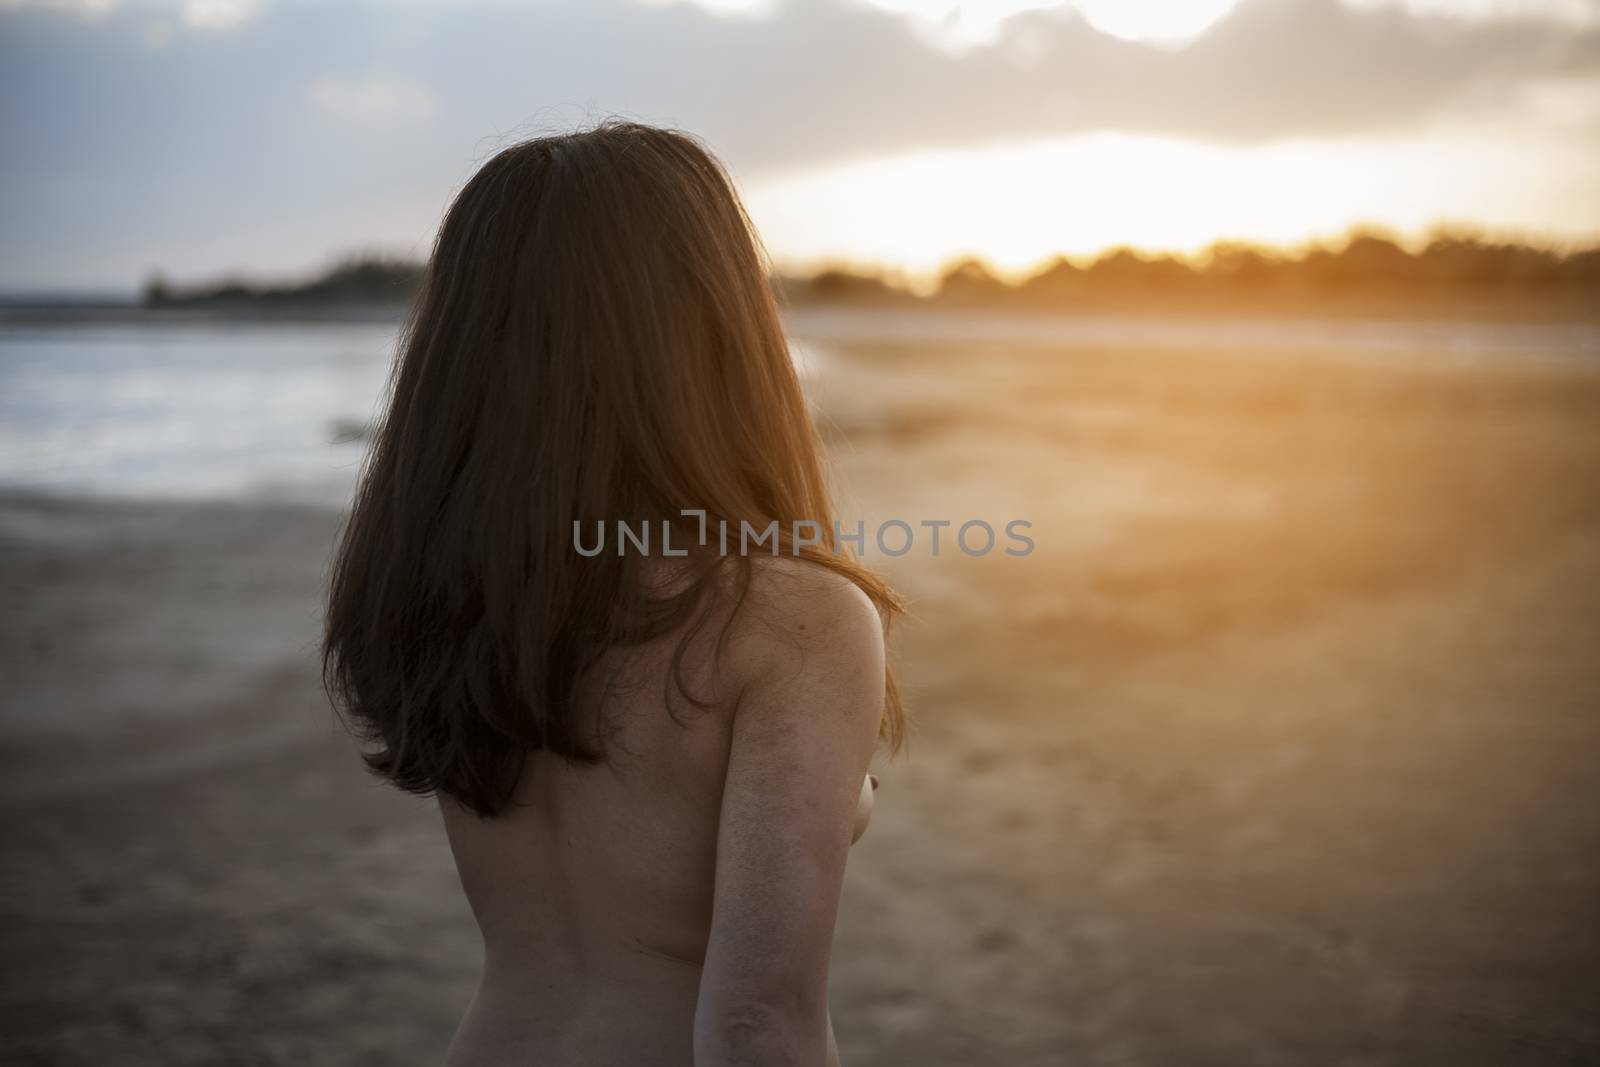 Naked carefree girl on beach with sunset in background. Back view